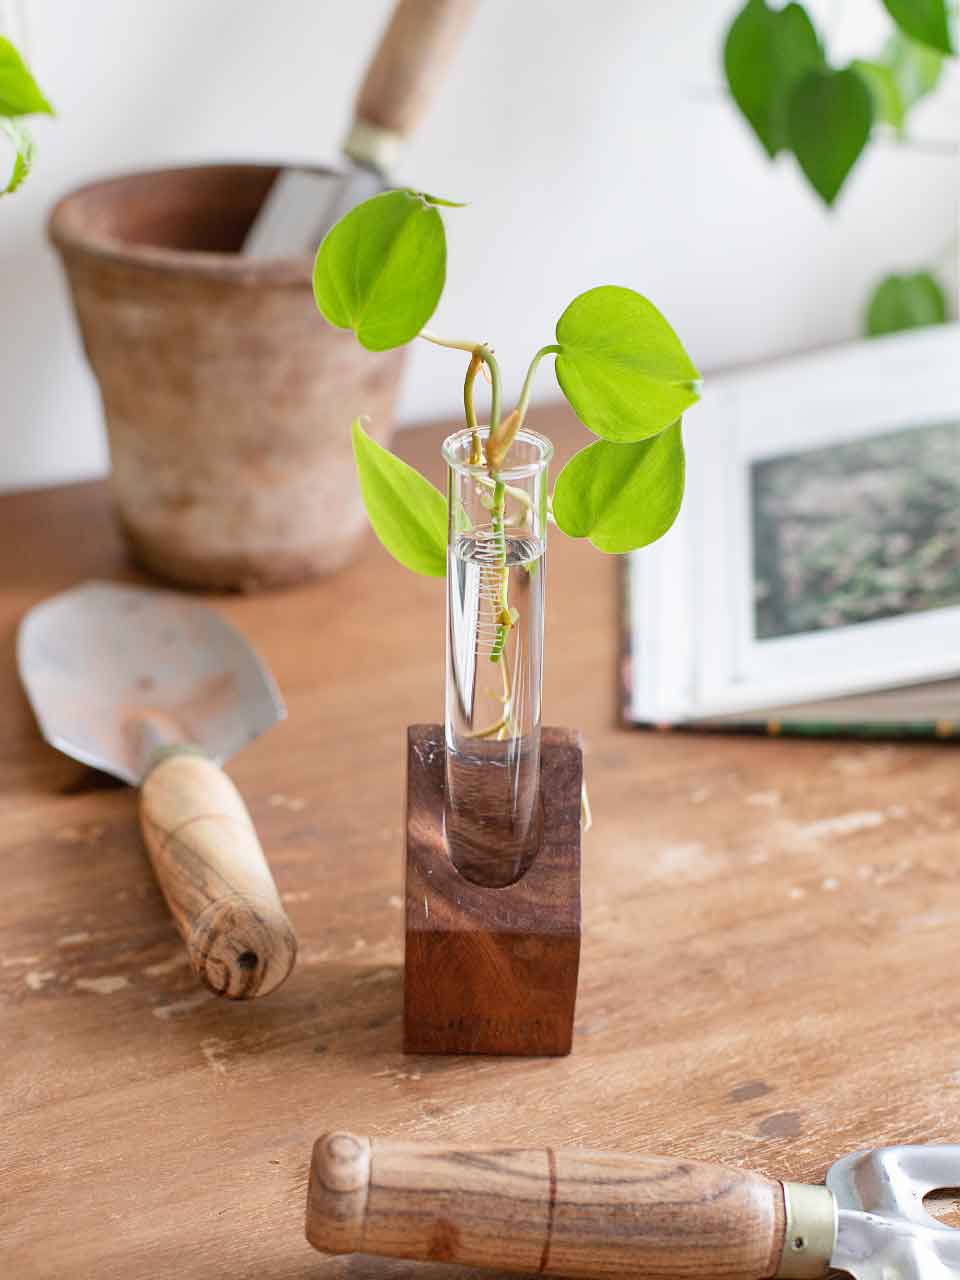 Table top test tube planter with hydroponic plant in it